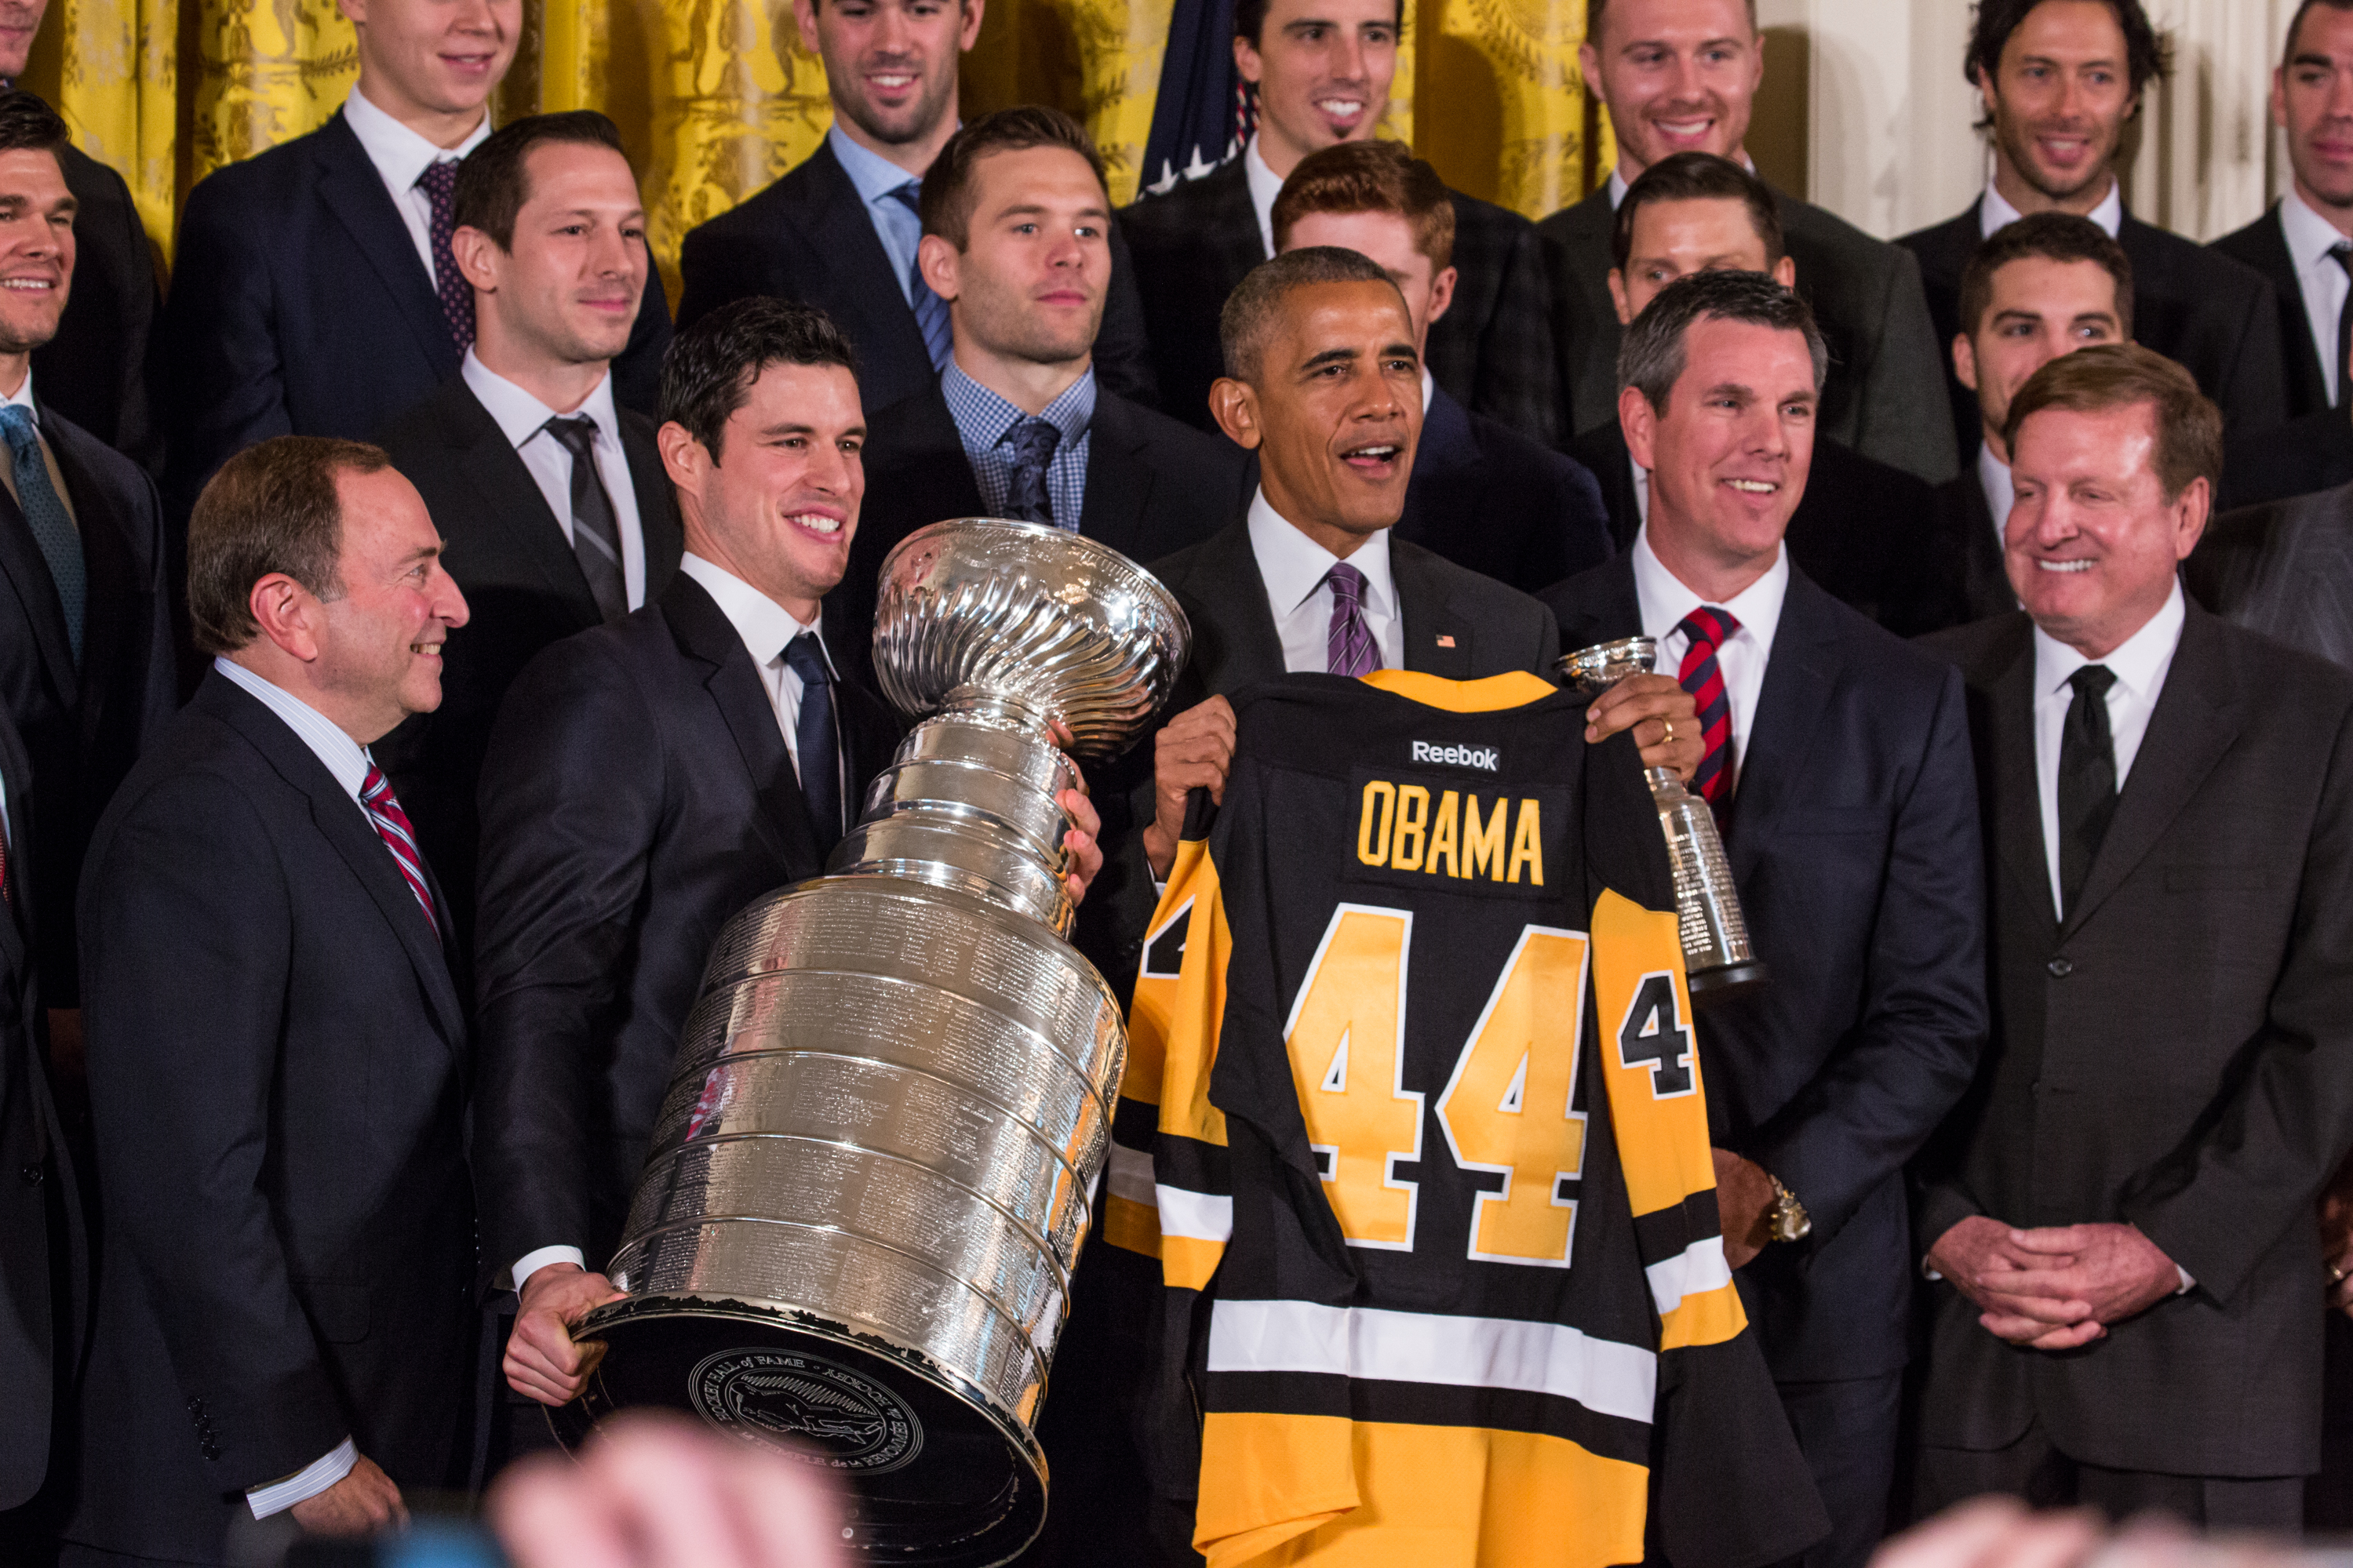 Obama honors Stanley Cup champion Boston Bruins